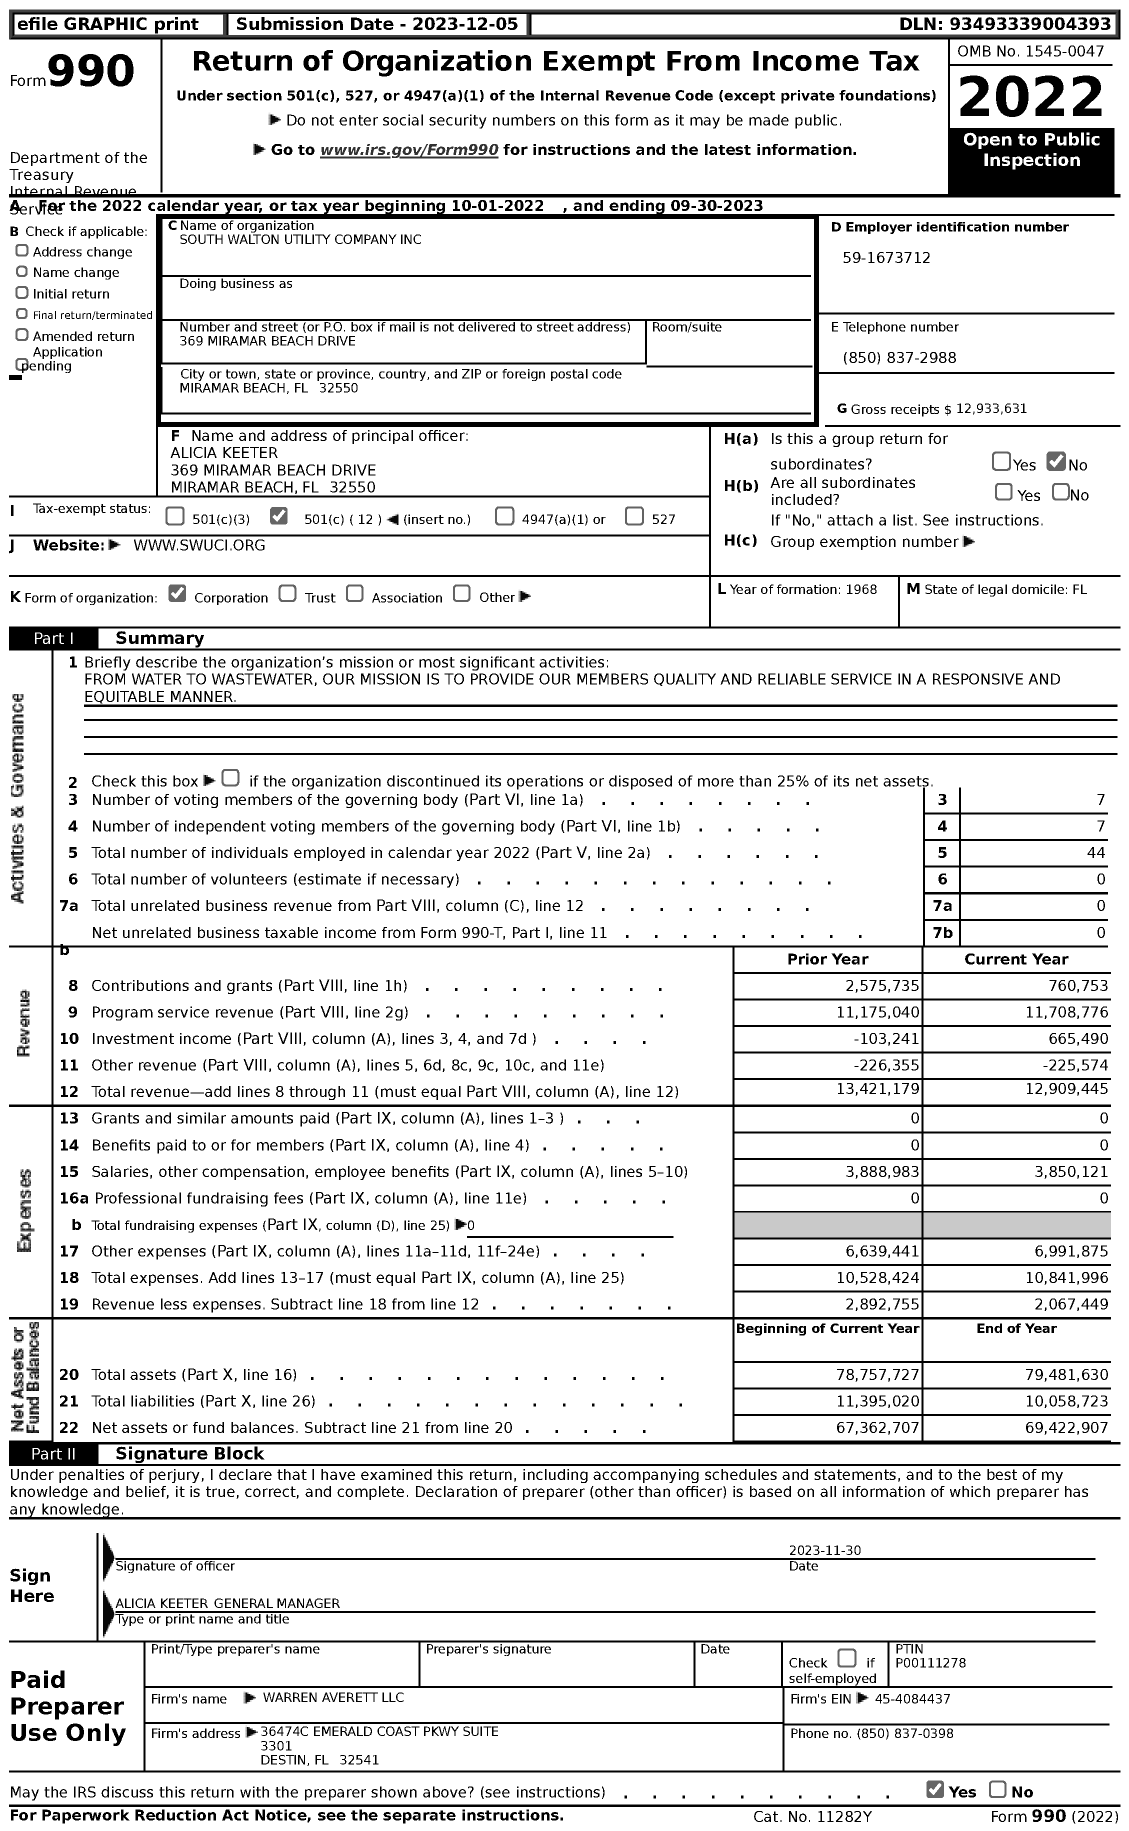 Image of first page of 2022 Form 990 for South Walton Utility Company